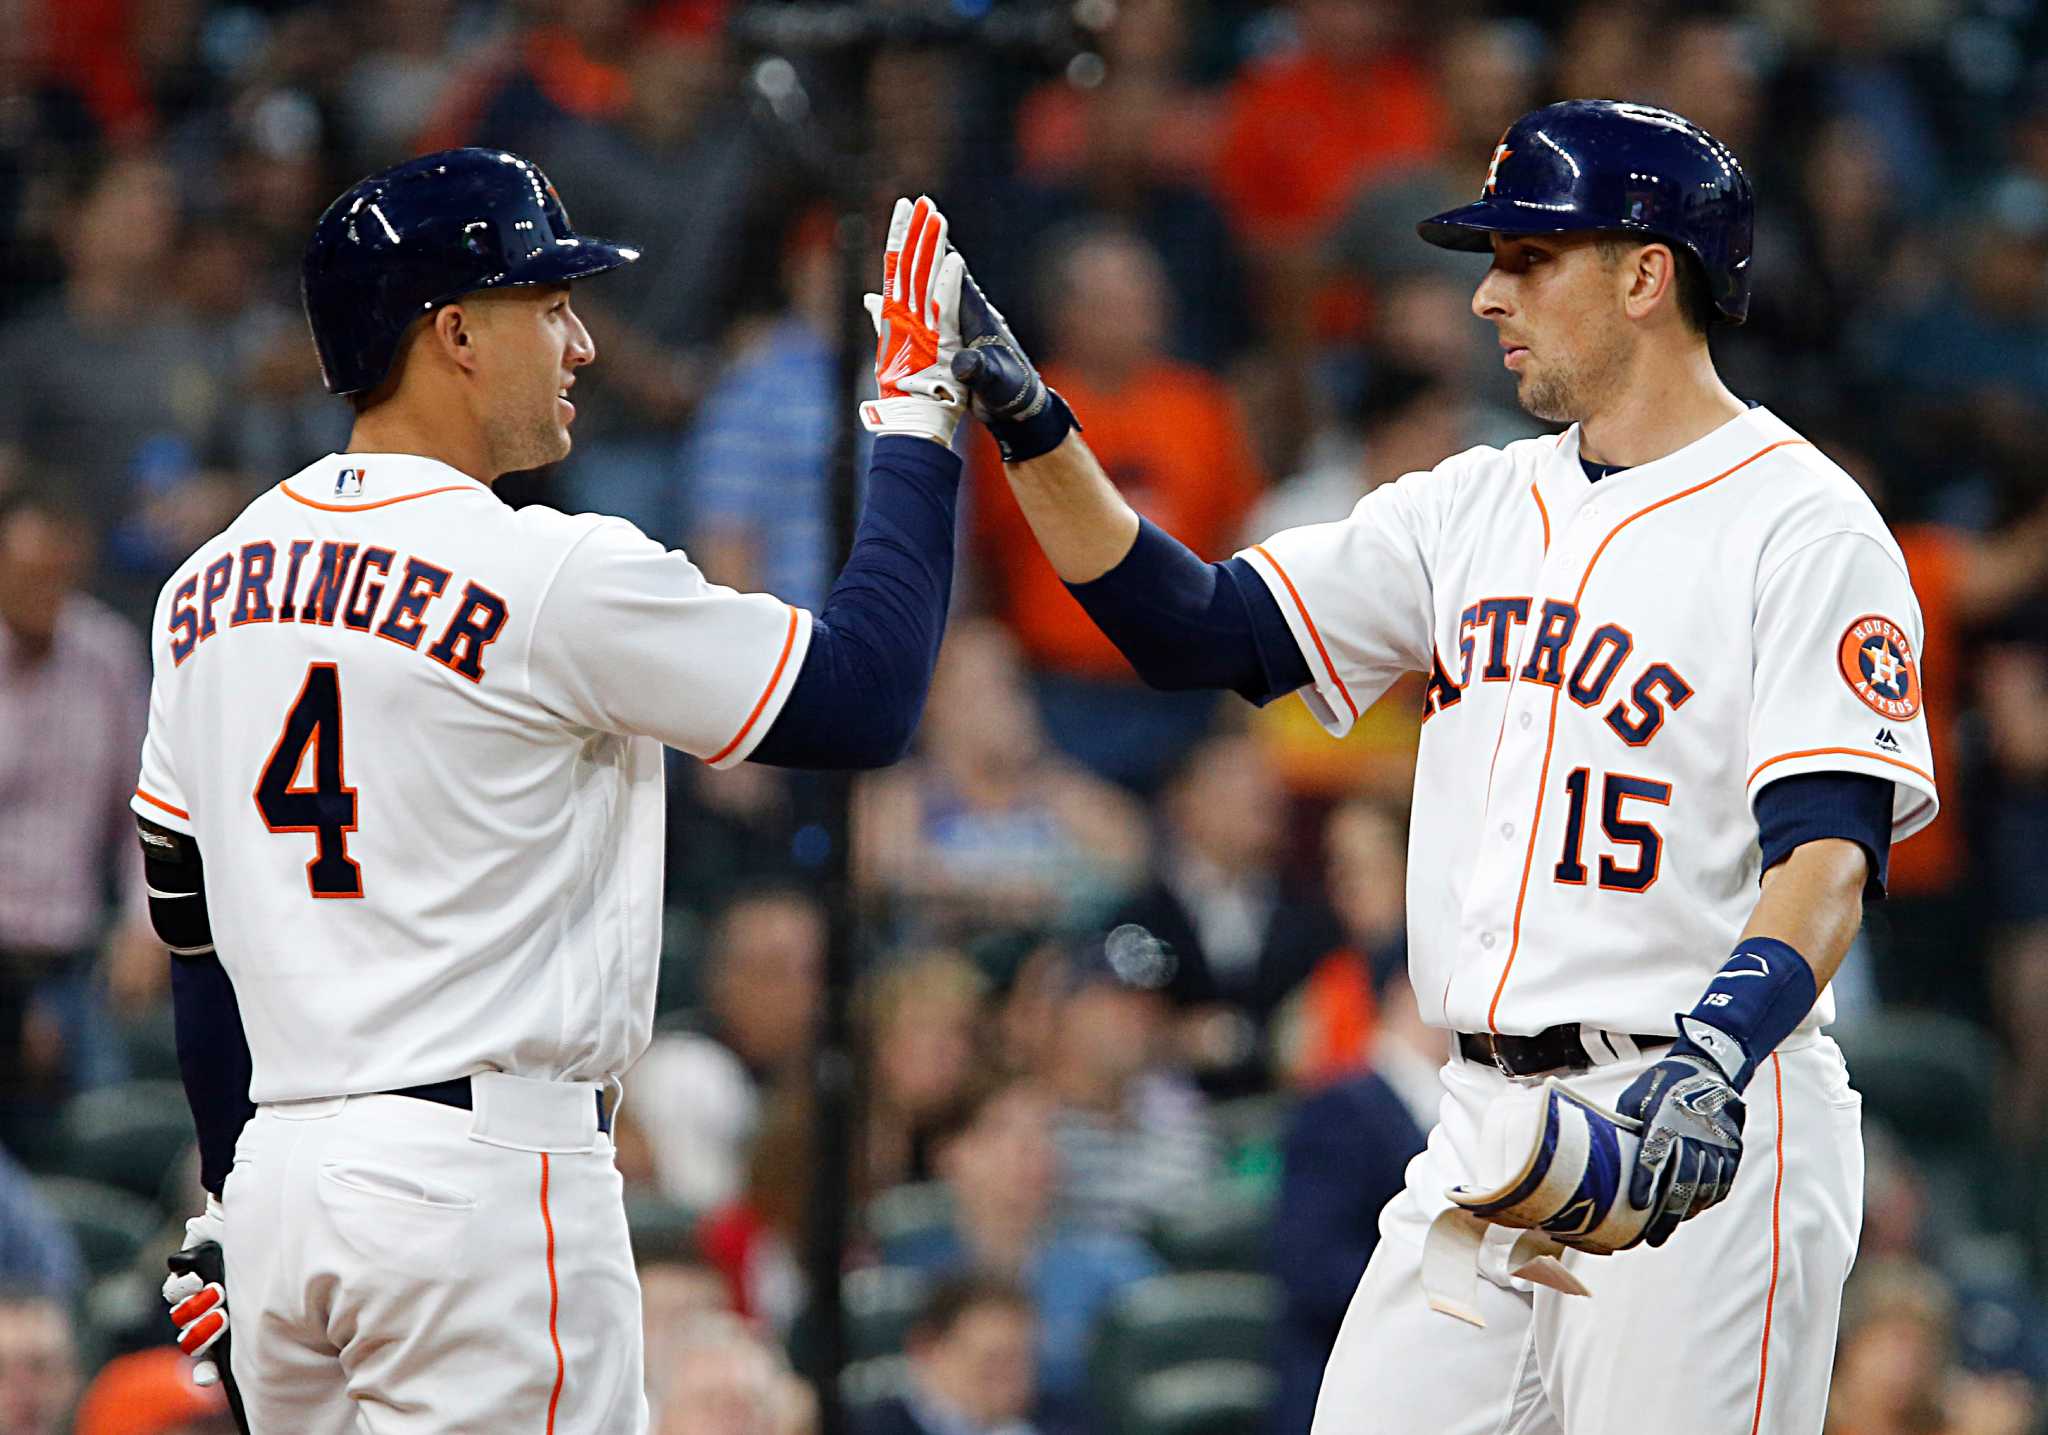 Evan Gattis takes shot at Mike Fiers for outing Astros as cheaters